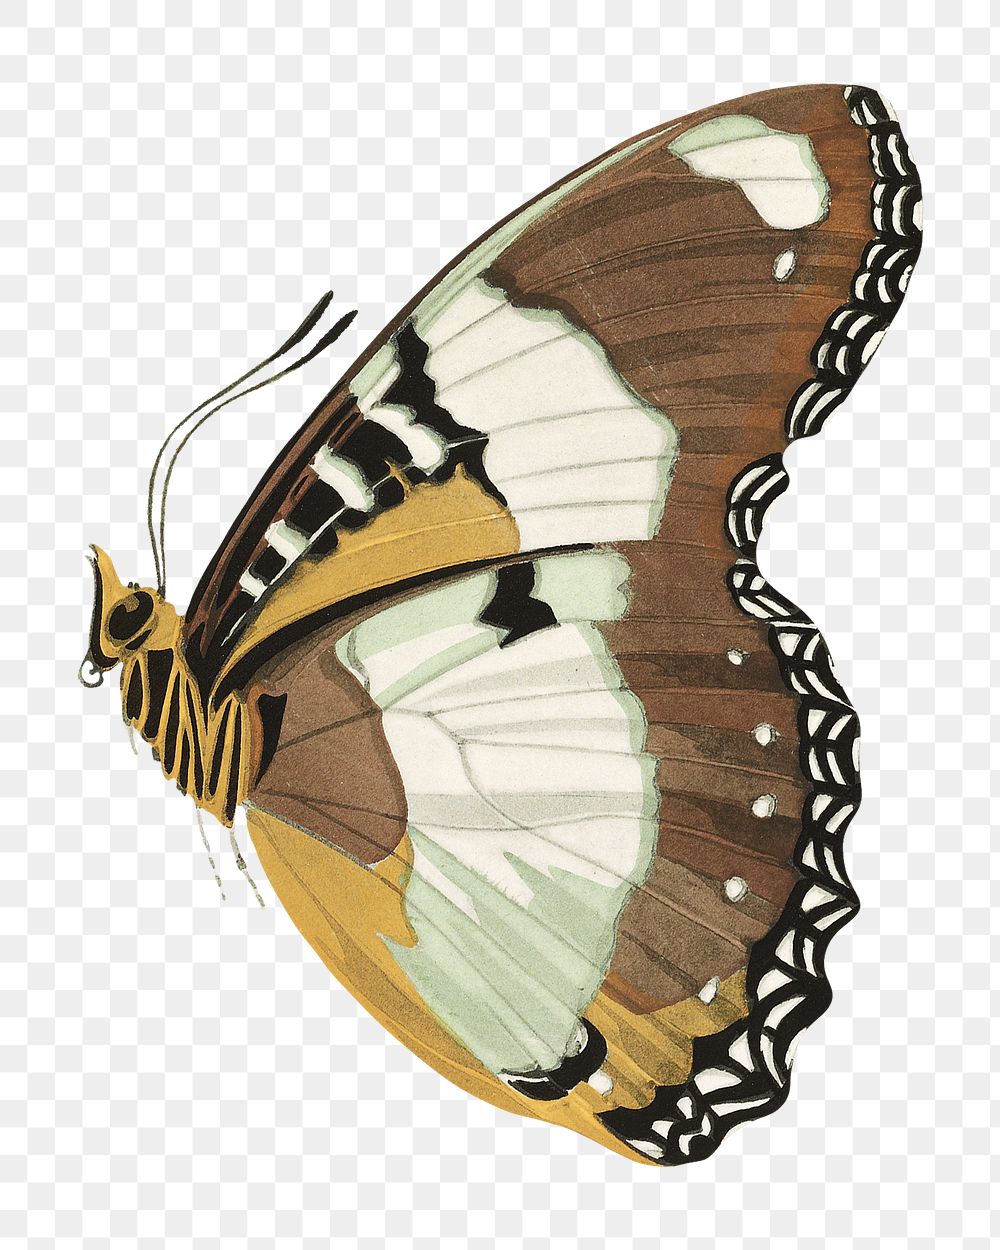 Art nouveau butterfly png sticker, vintage insect on transparent background. E.A. S&eacute;guy's artwork remixed by rawpixel